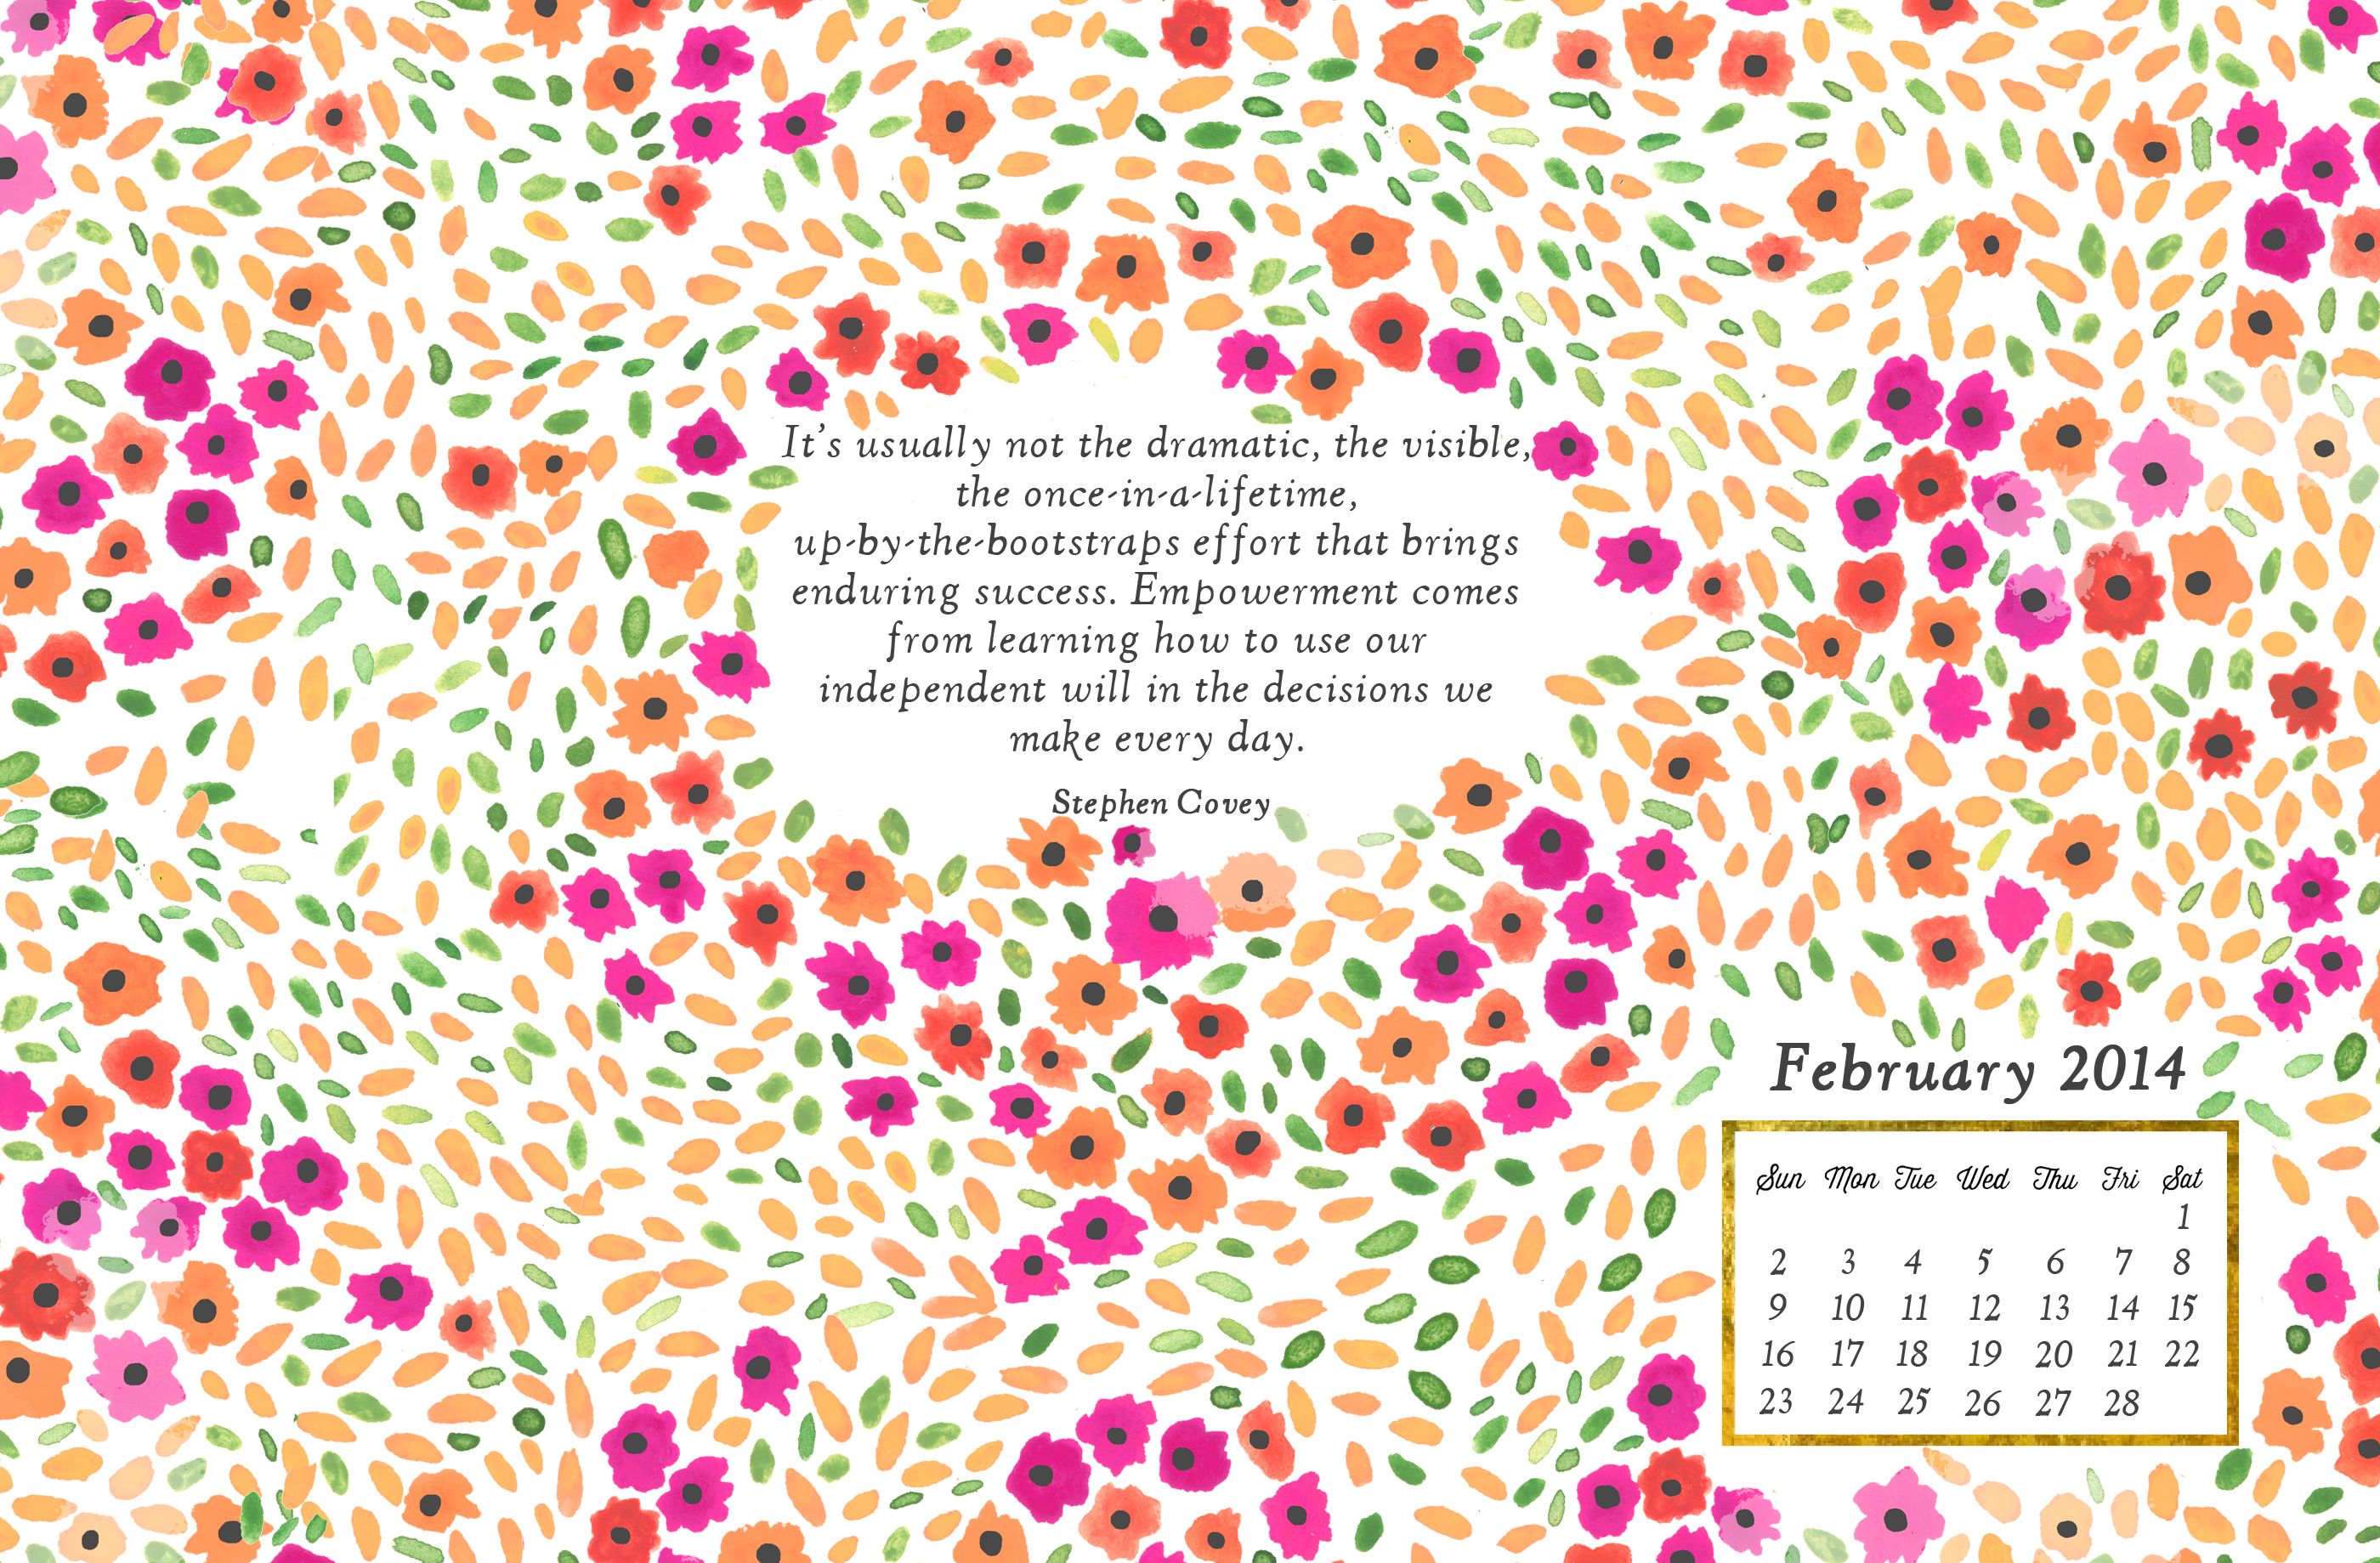 The lively show, topic suggestions, & free february wallpaper